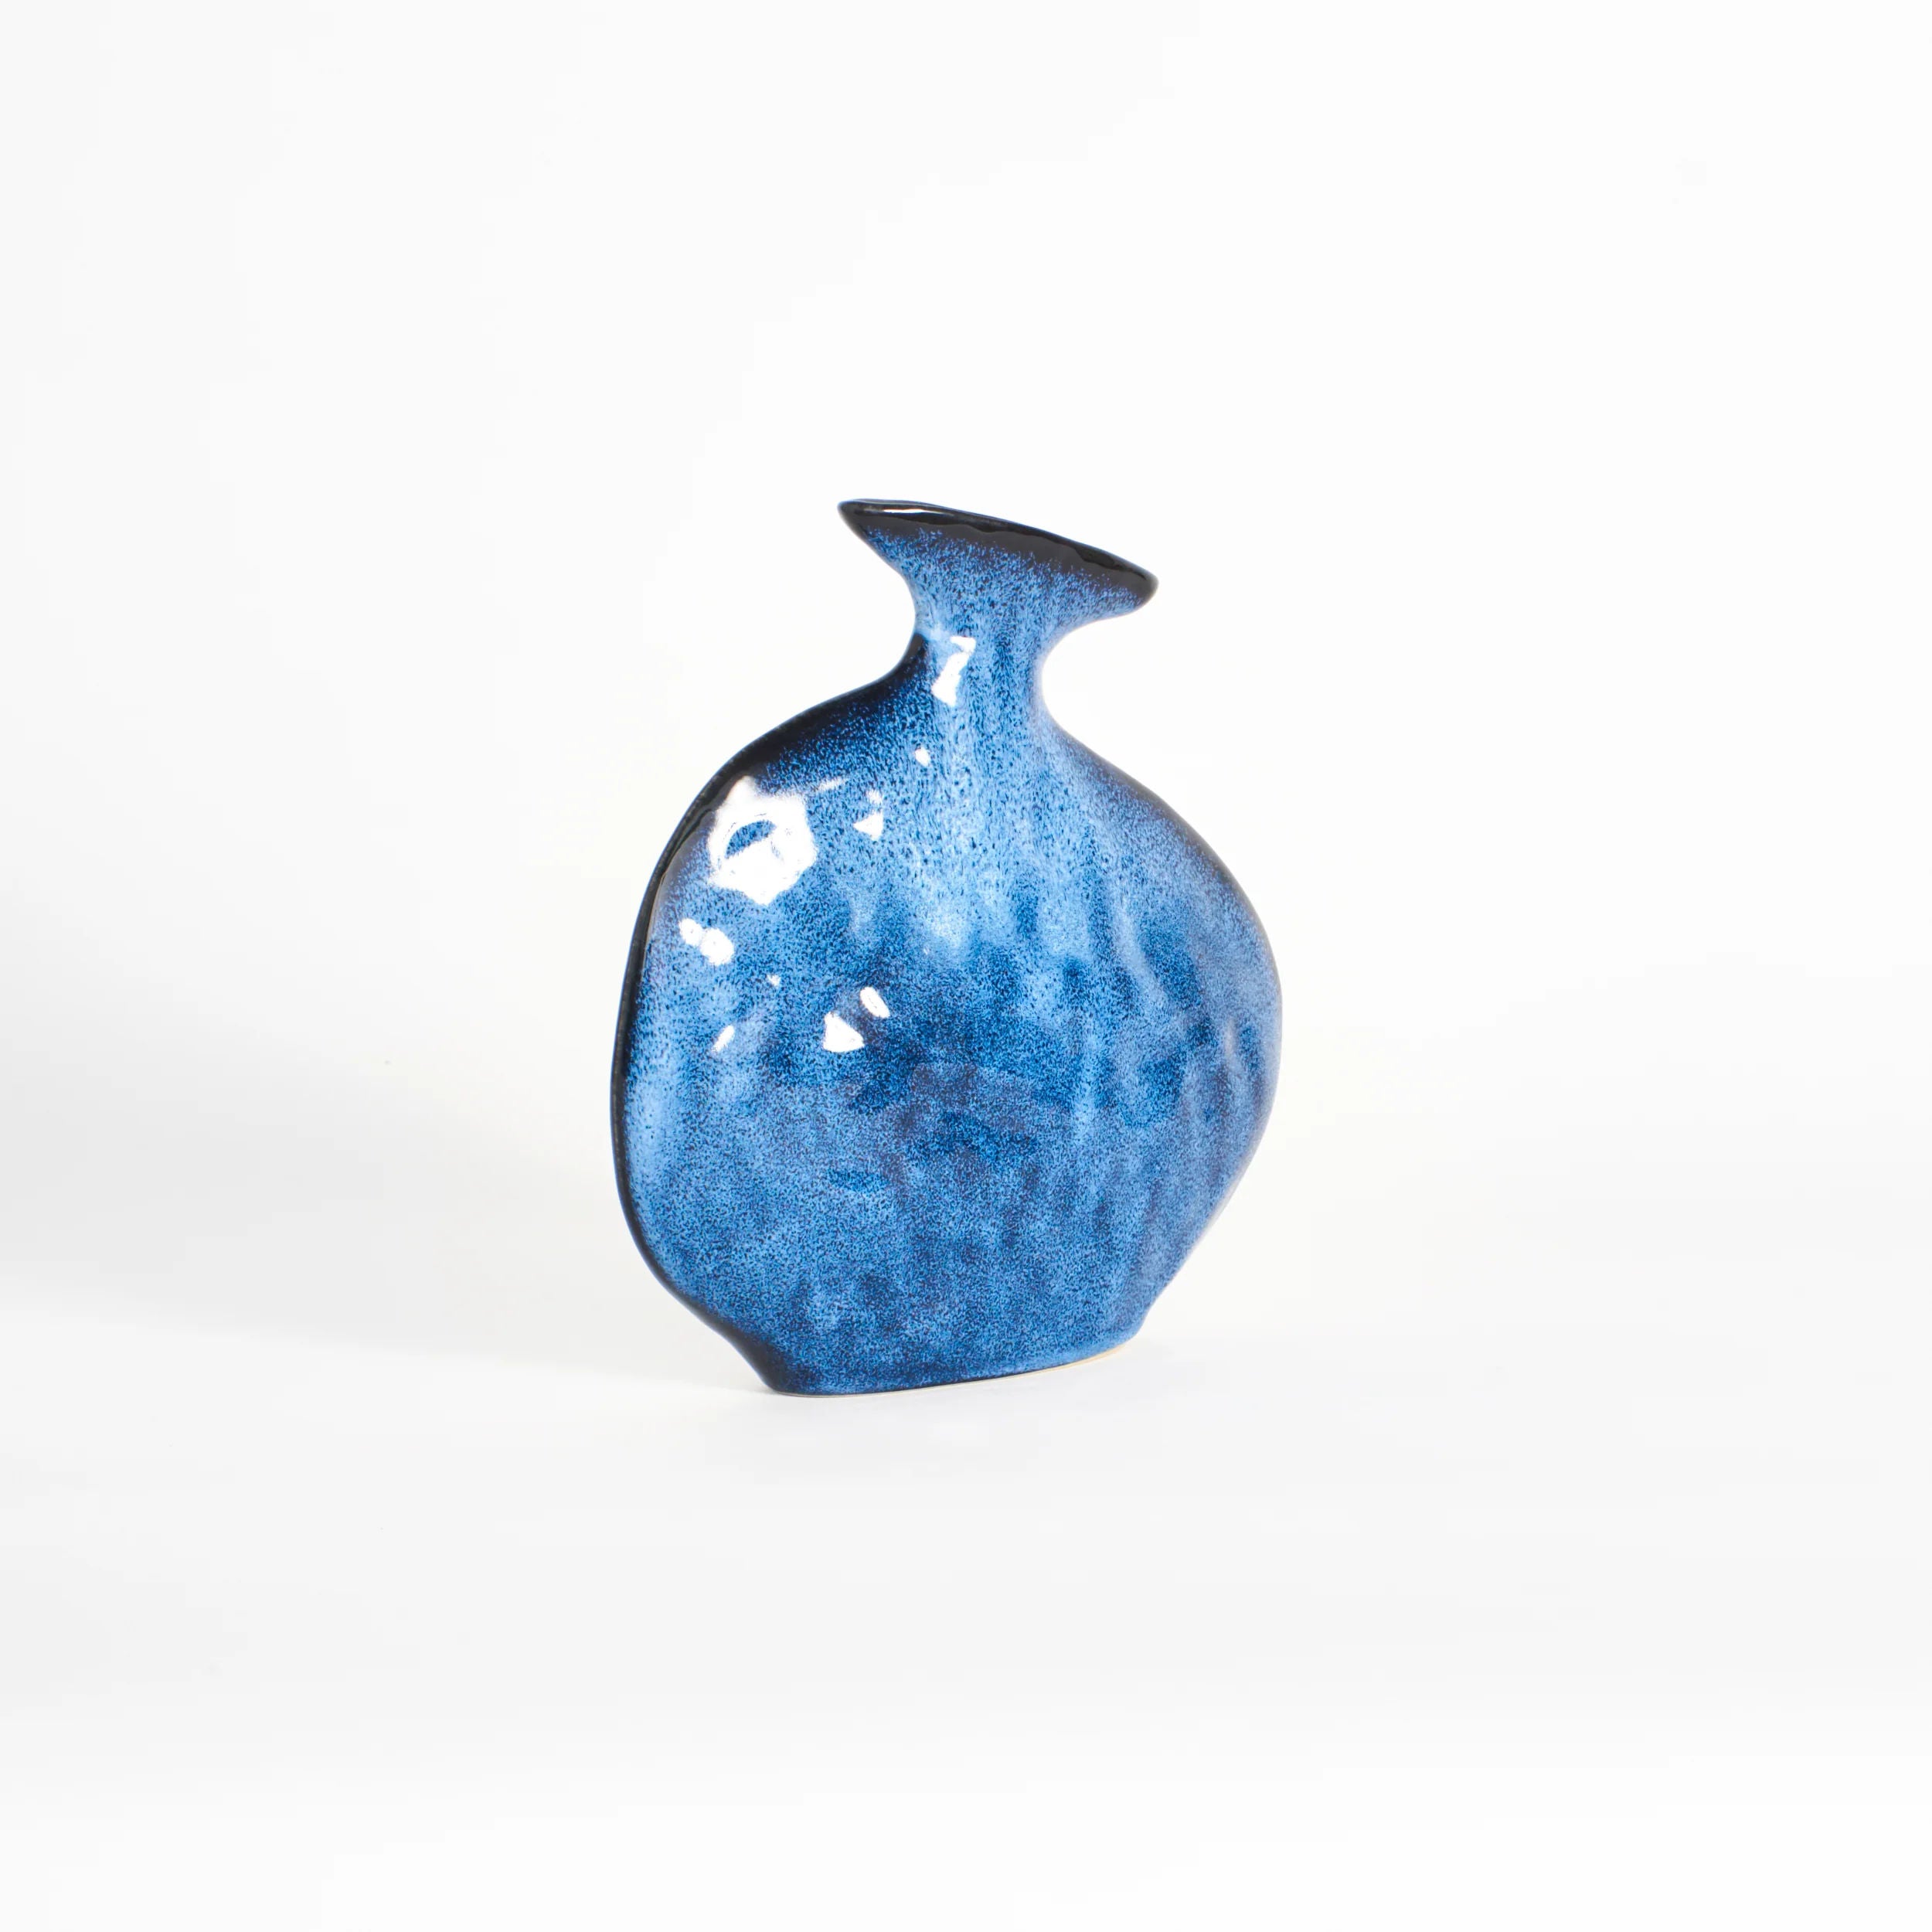 Vases Flat Vase in Midnight Blue Project 213A